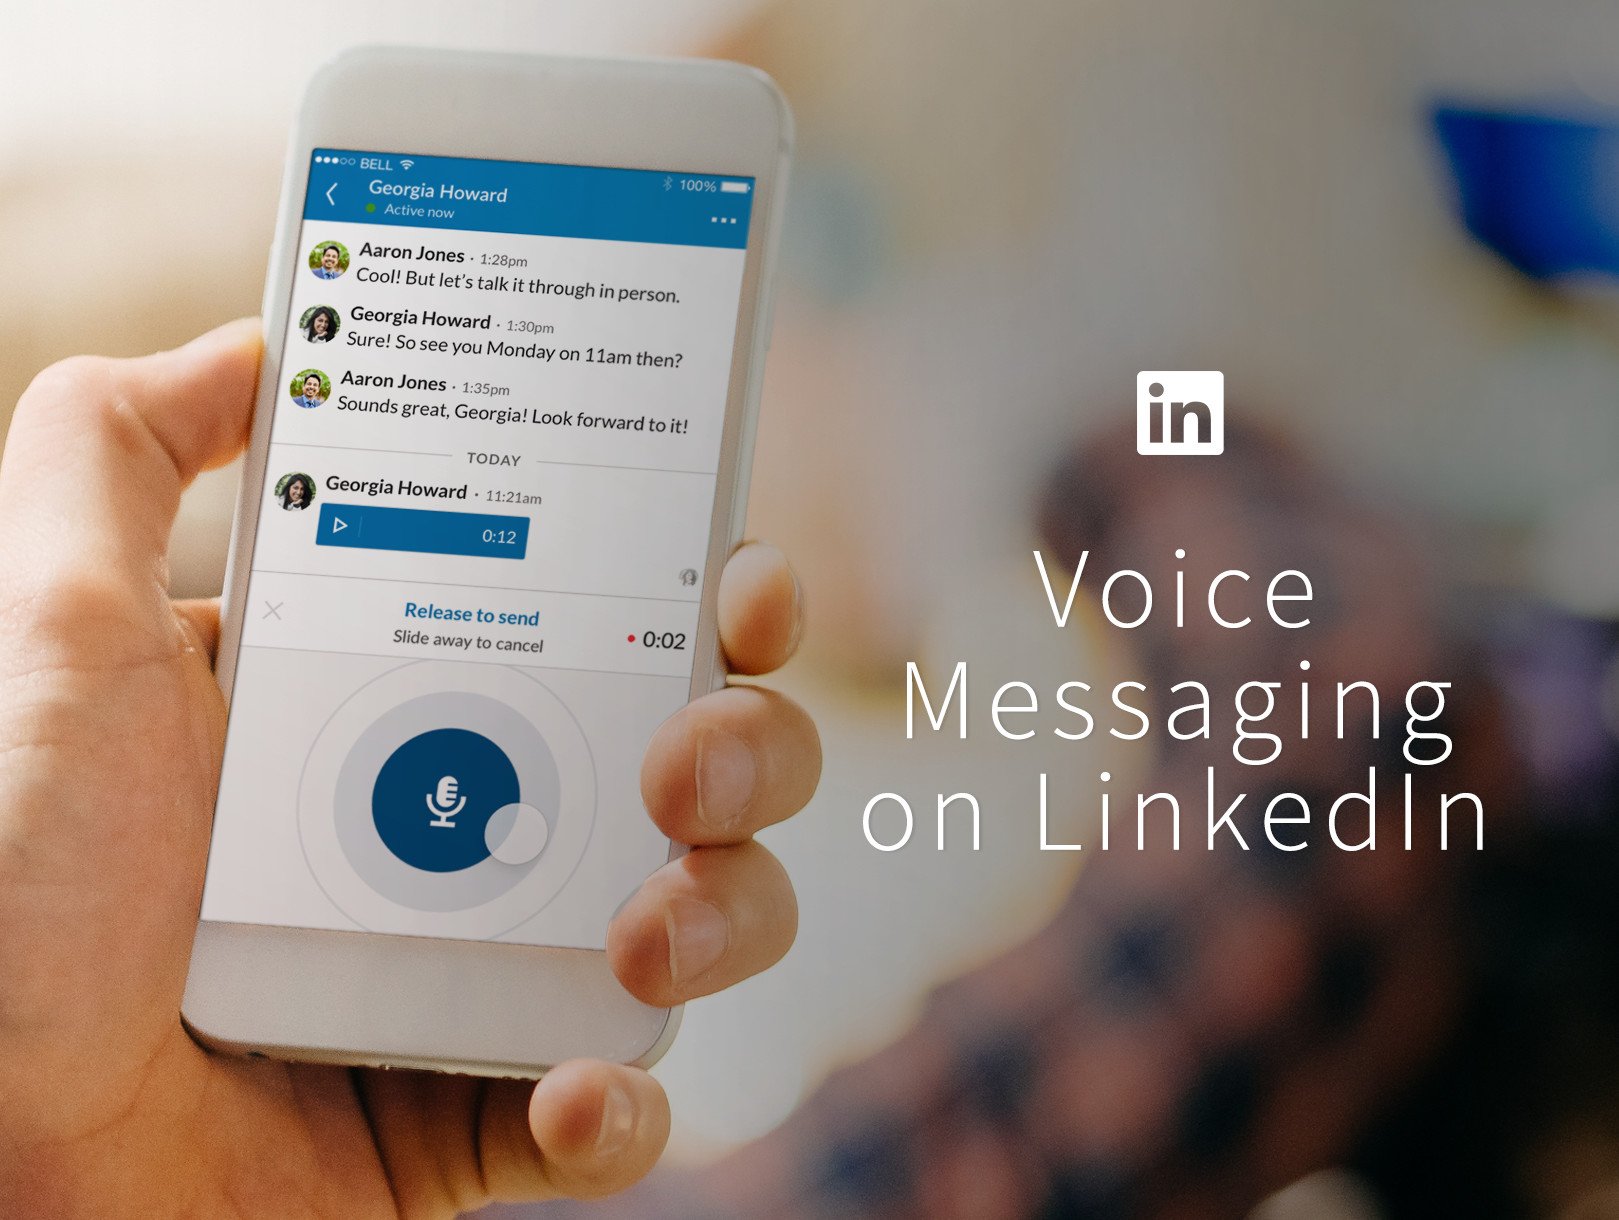 Voice messaging is coming to your LinkedIn chats